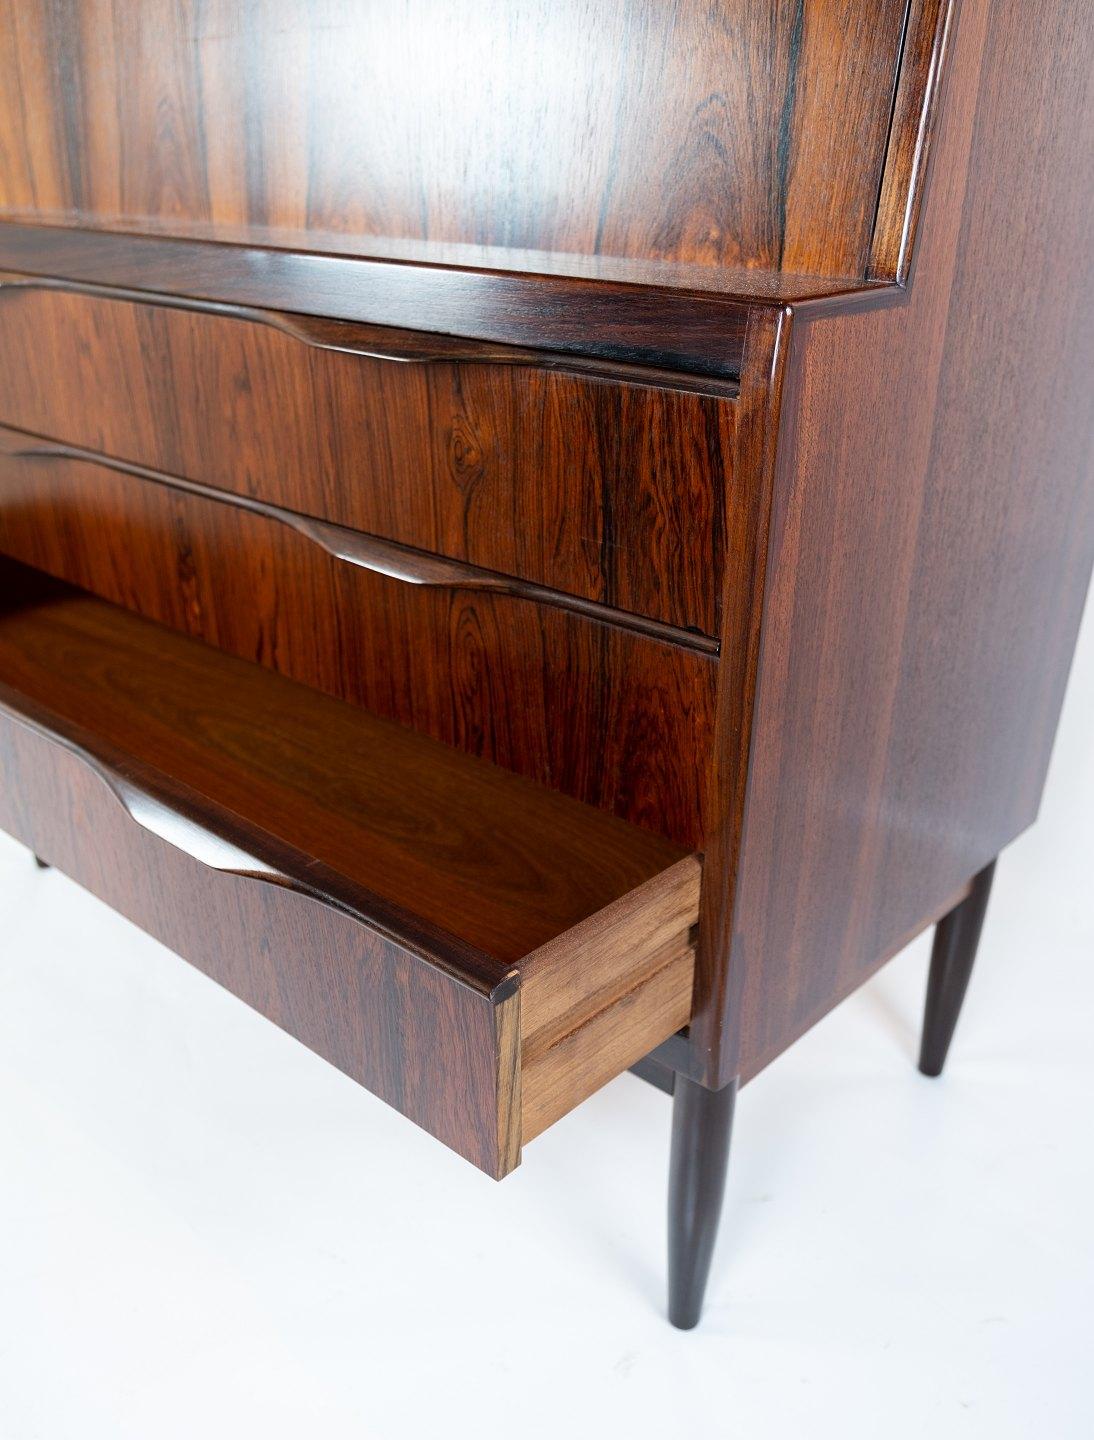 
This secretary, crafted in rosewood and showcasing Danish design from the 1960s, epitomizes both functionality and aesthetic appeal. With its sleek lines and rich wood grain, it exudes a timeless elegance that complements any interior decor.

The